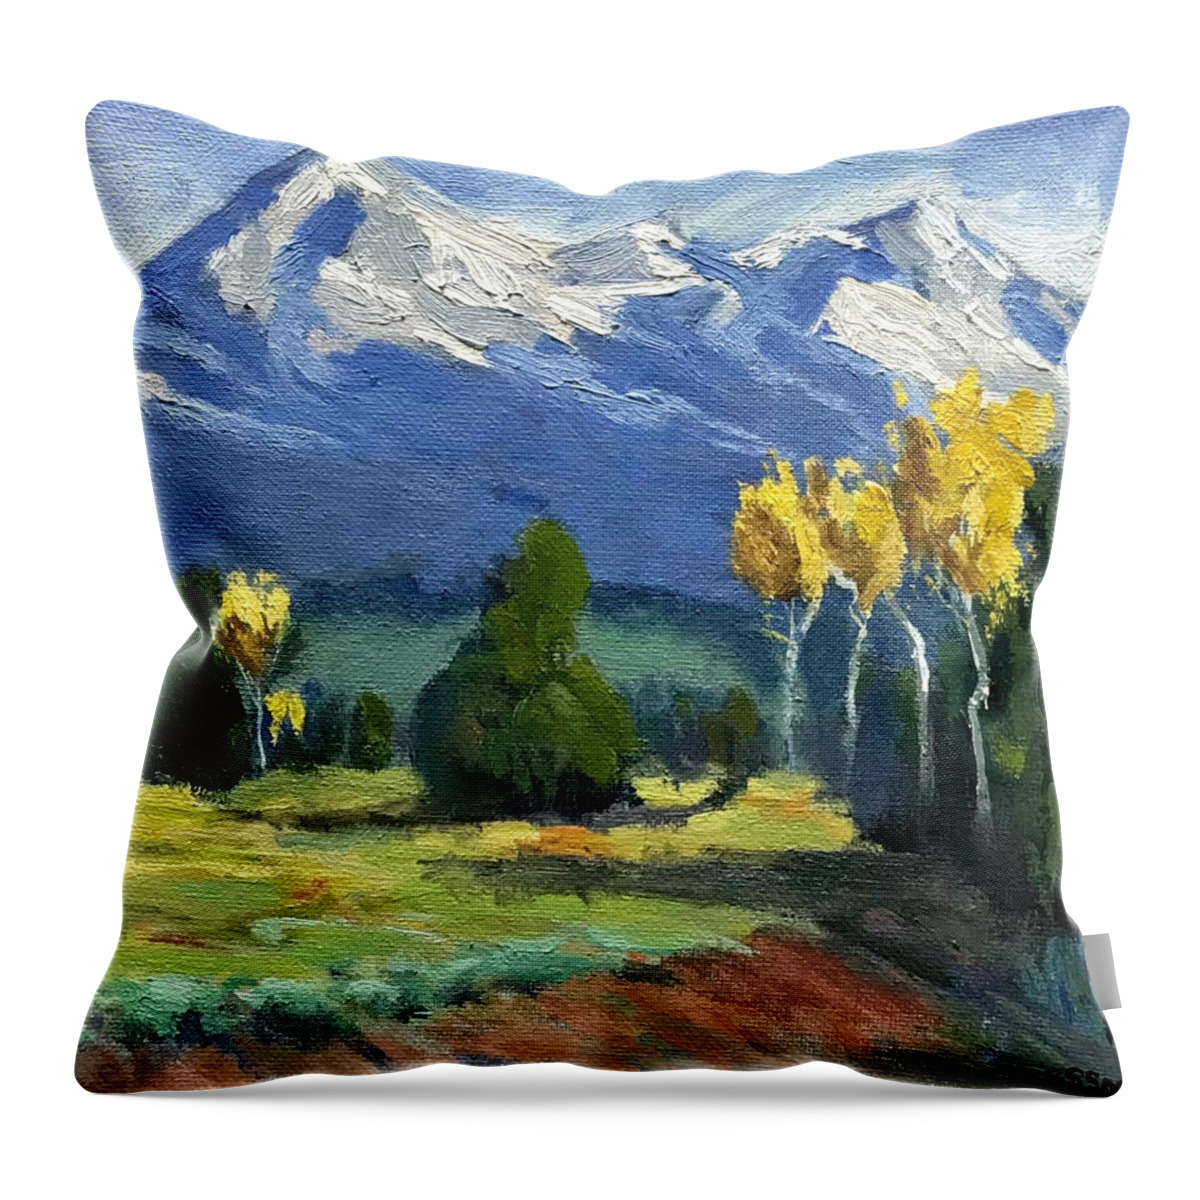 Grand Tetons Throw Pillow featuring the painting Grand Tetons by Shawn Smith